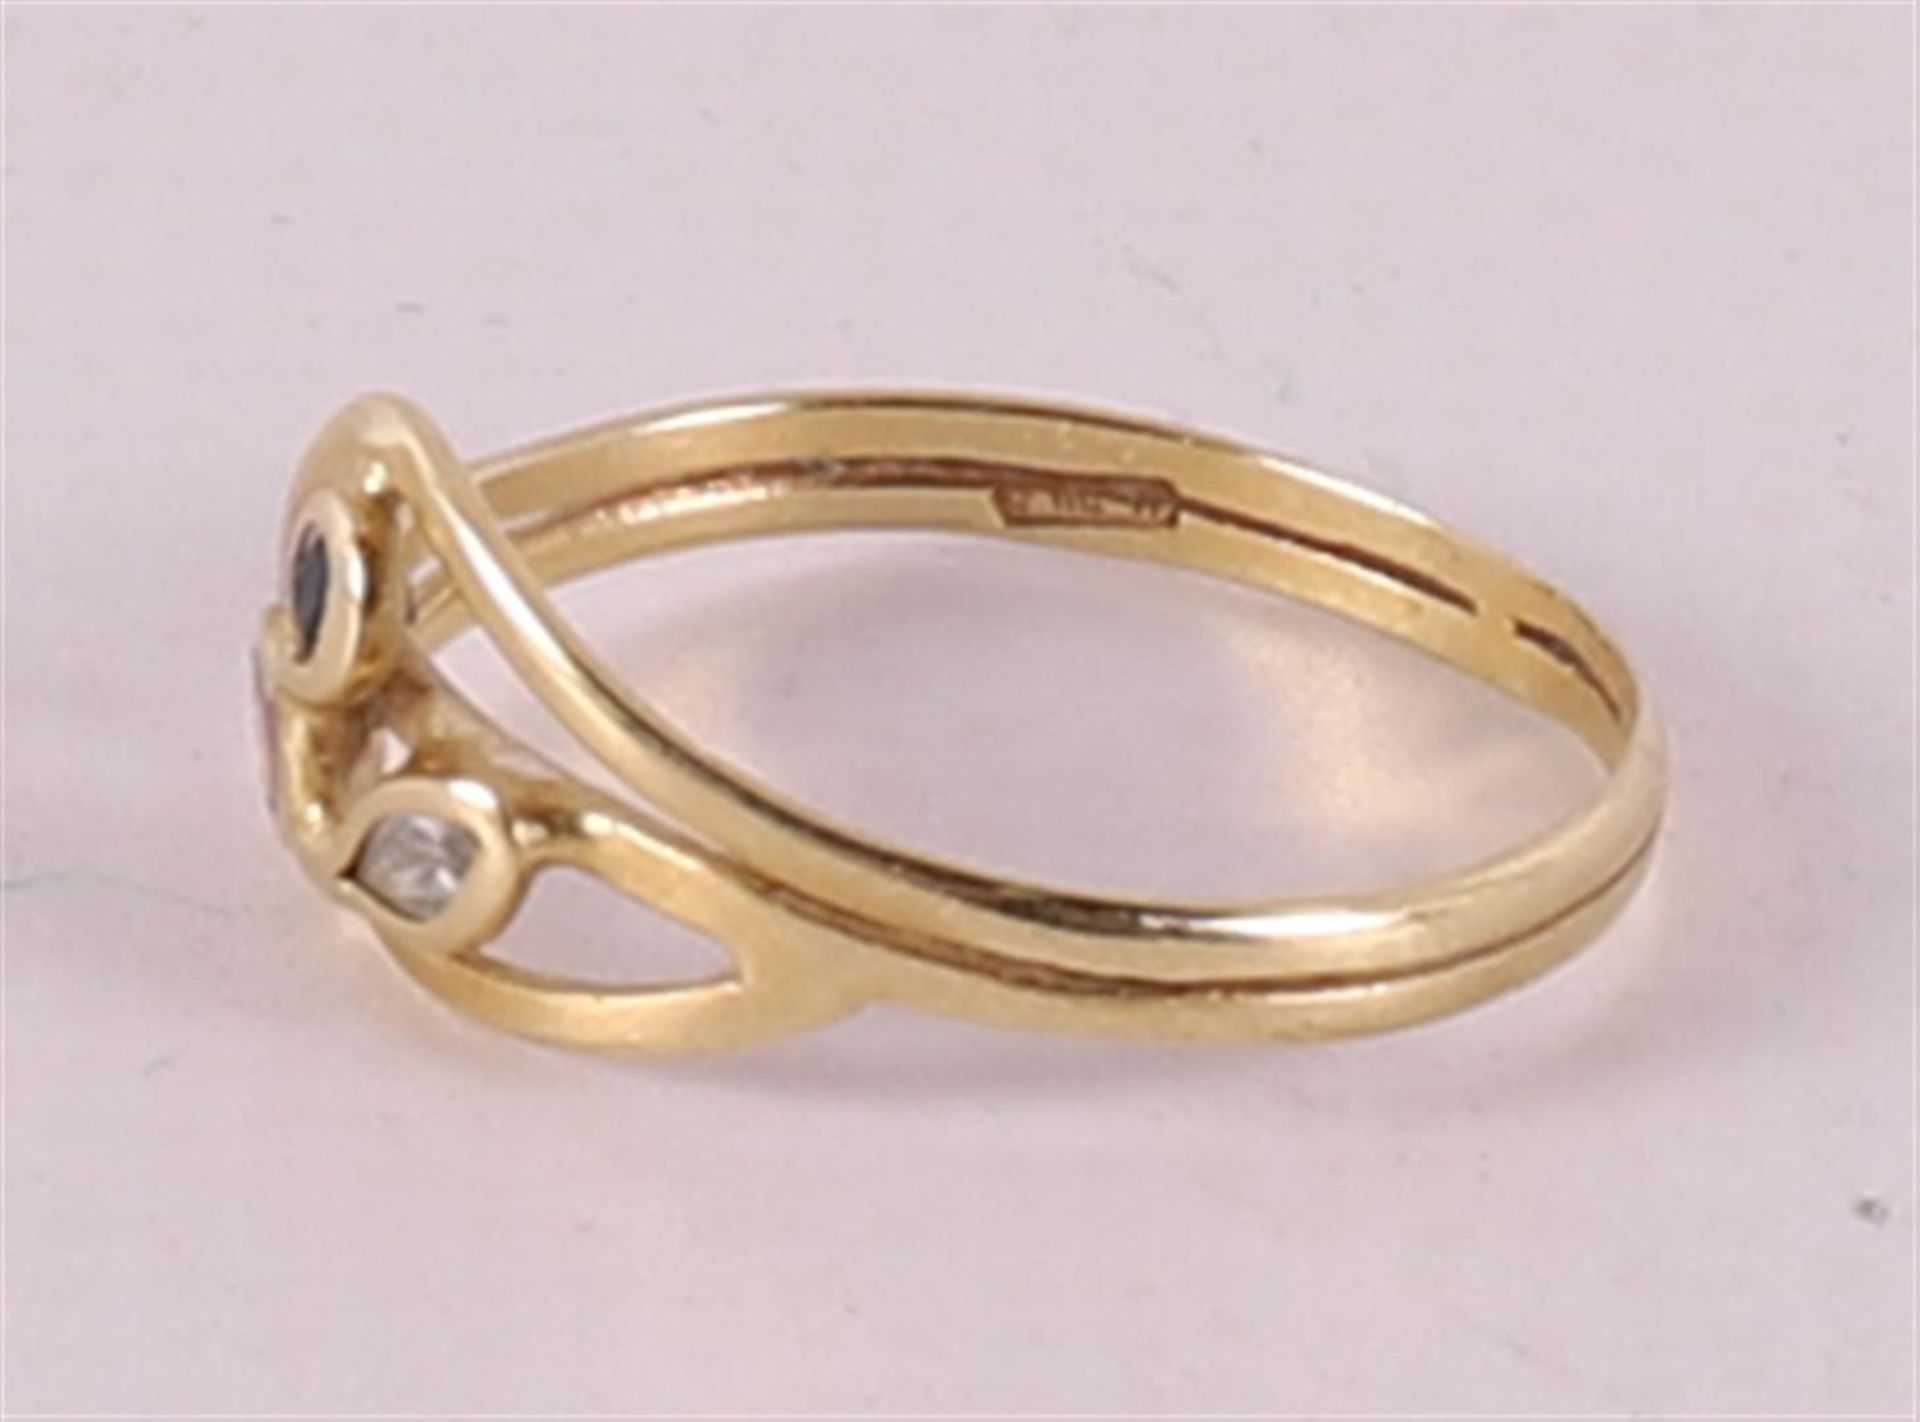 An 18 kt yellow gold women's ring, set with three colored stones. - Image 2 of 2